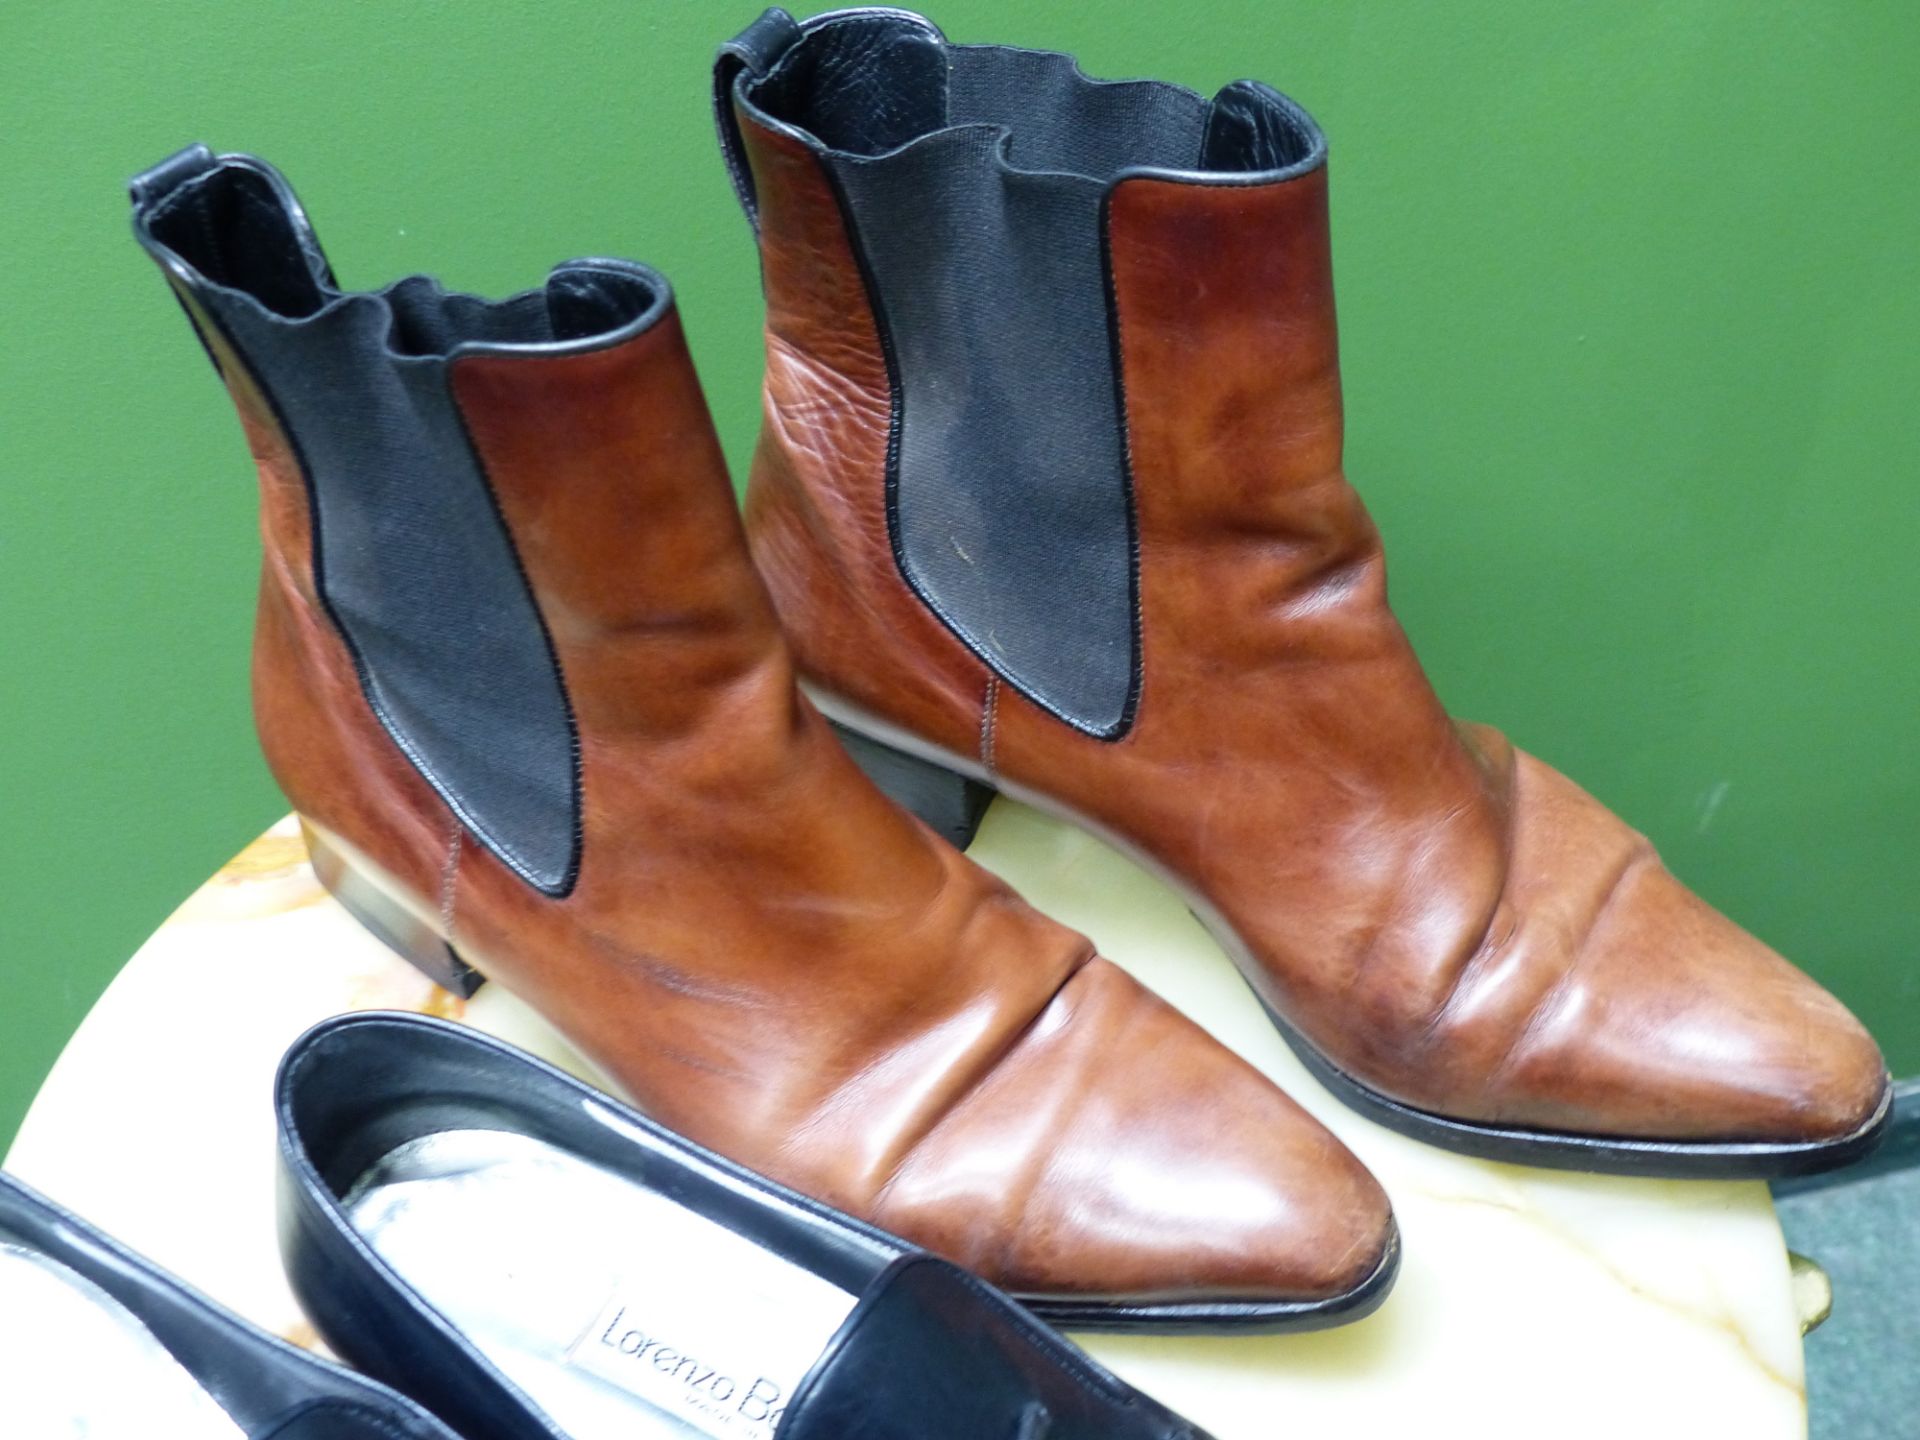 SHOES. LORENZO BANFI ITALY BLACK LEATHER COURT SHOES EUR SIZE 39.5. TOGETHER WITH BROWN BOOTS SIZE - Image 3 of 10